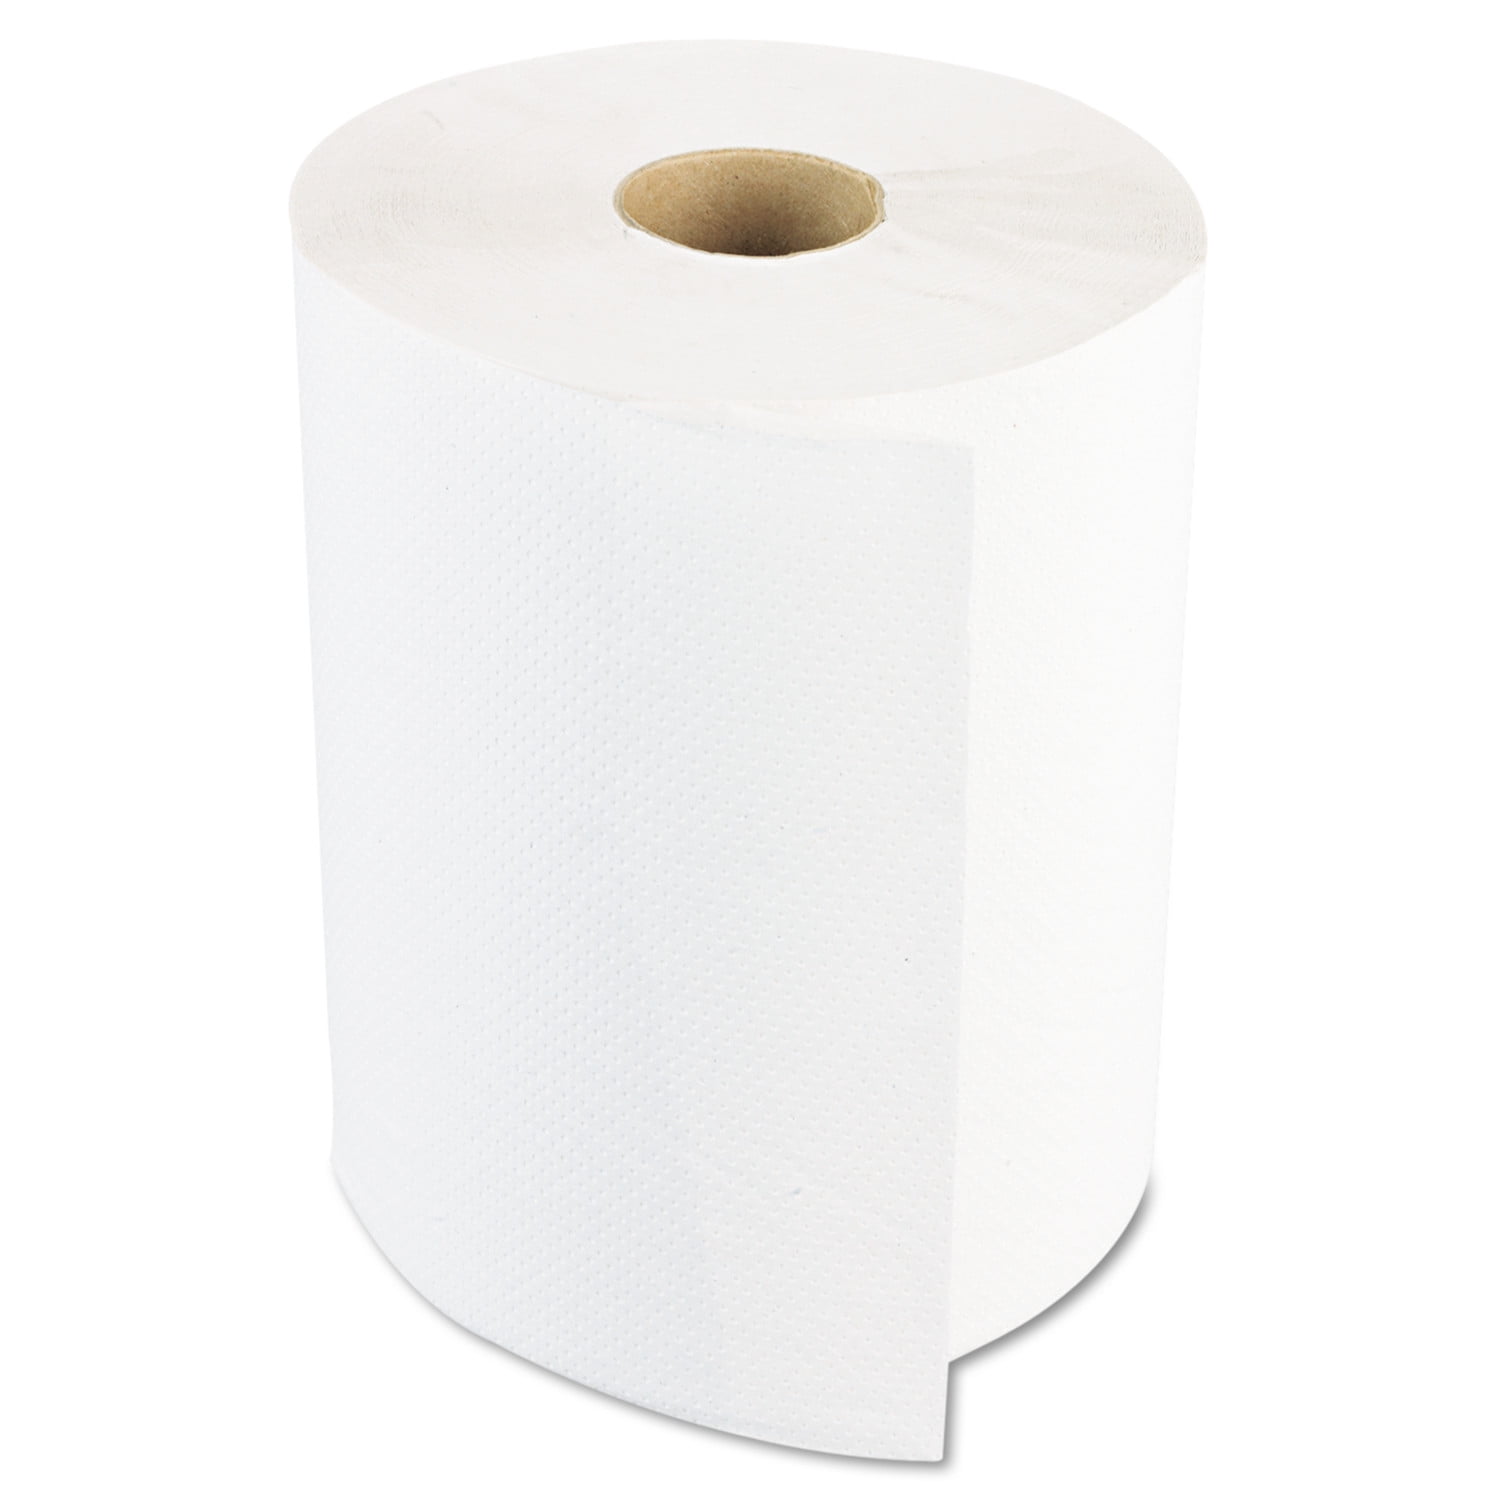 Details about   Tork Centerfeed Hand Towel 2-Ply 7.6" x 519 ft White 530/Roll 6 Roll/Carton 